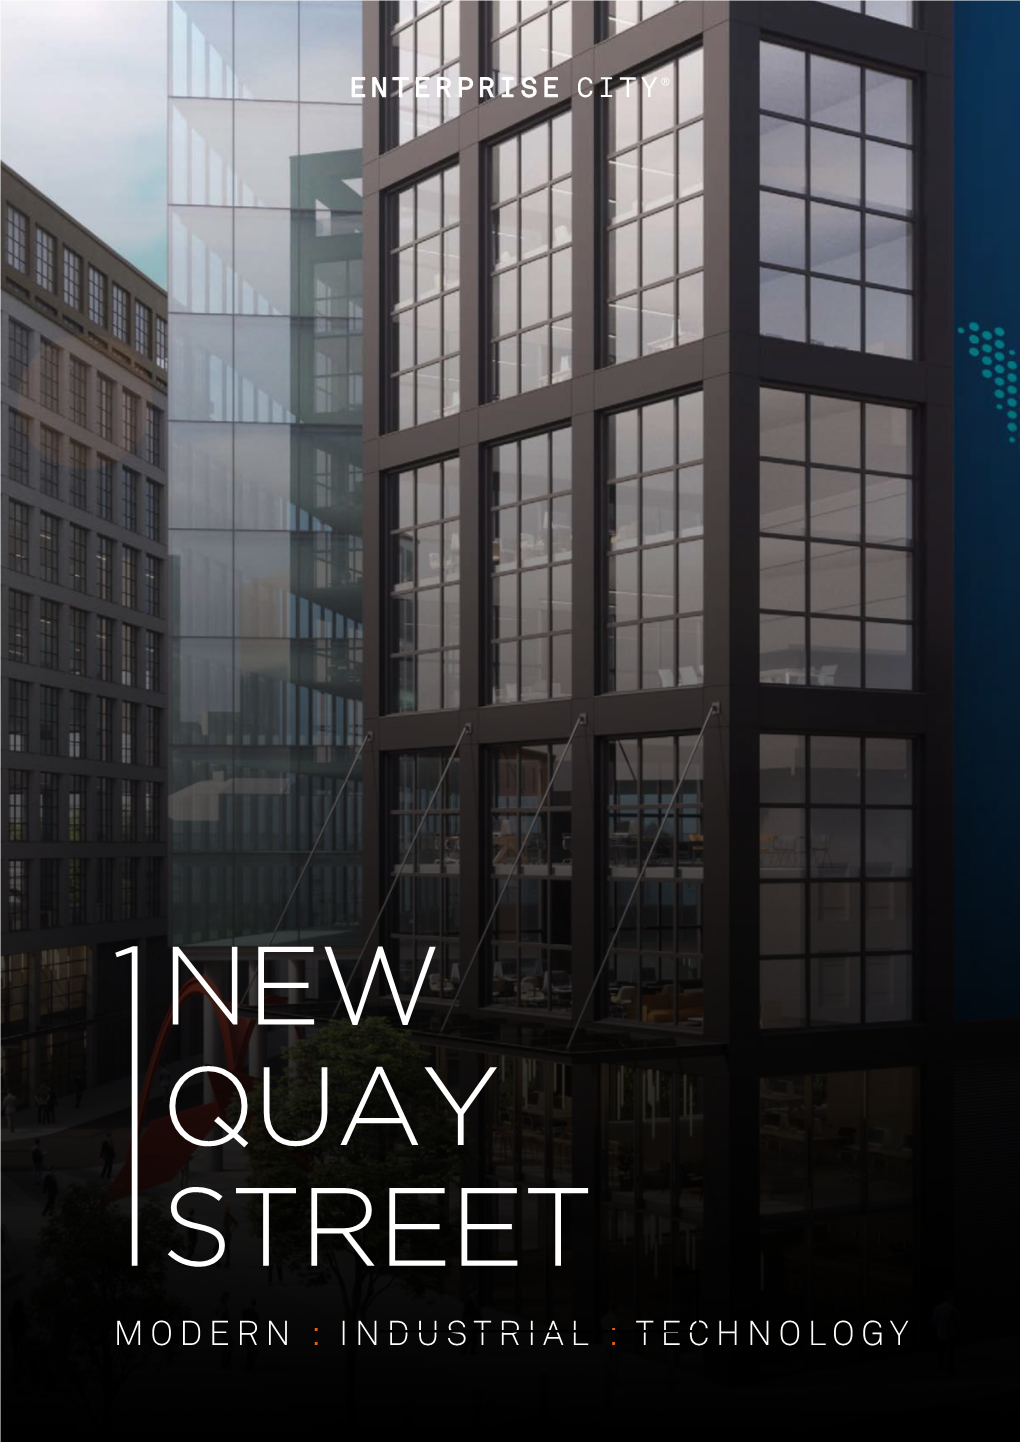 TECHNOLOGY 1 NEW QUAY STREET: an Amazing Building Designed for Modern Industry and Located at the Heart of Enterprise City